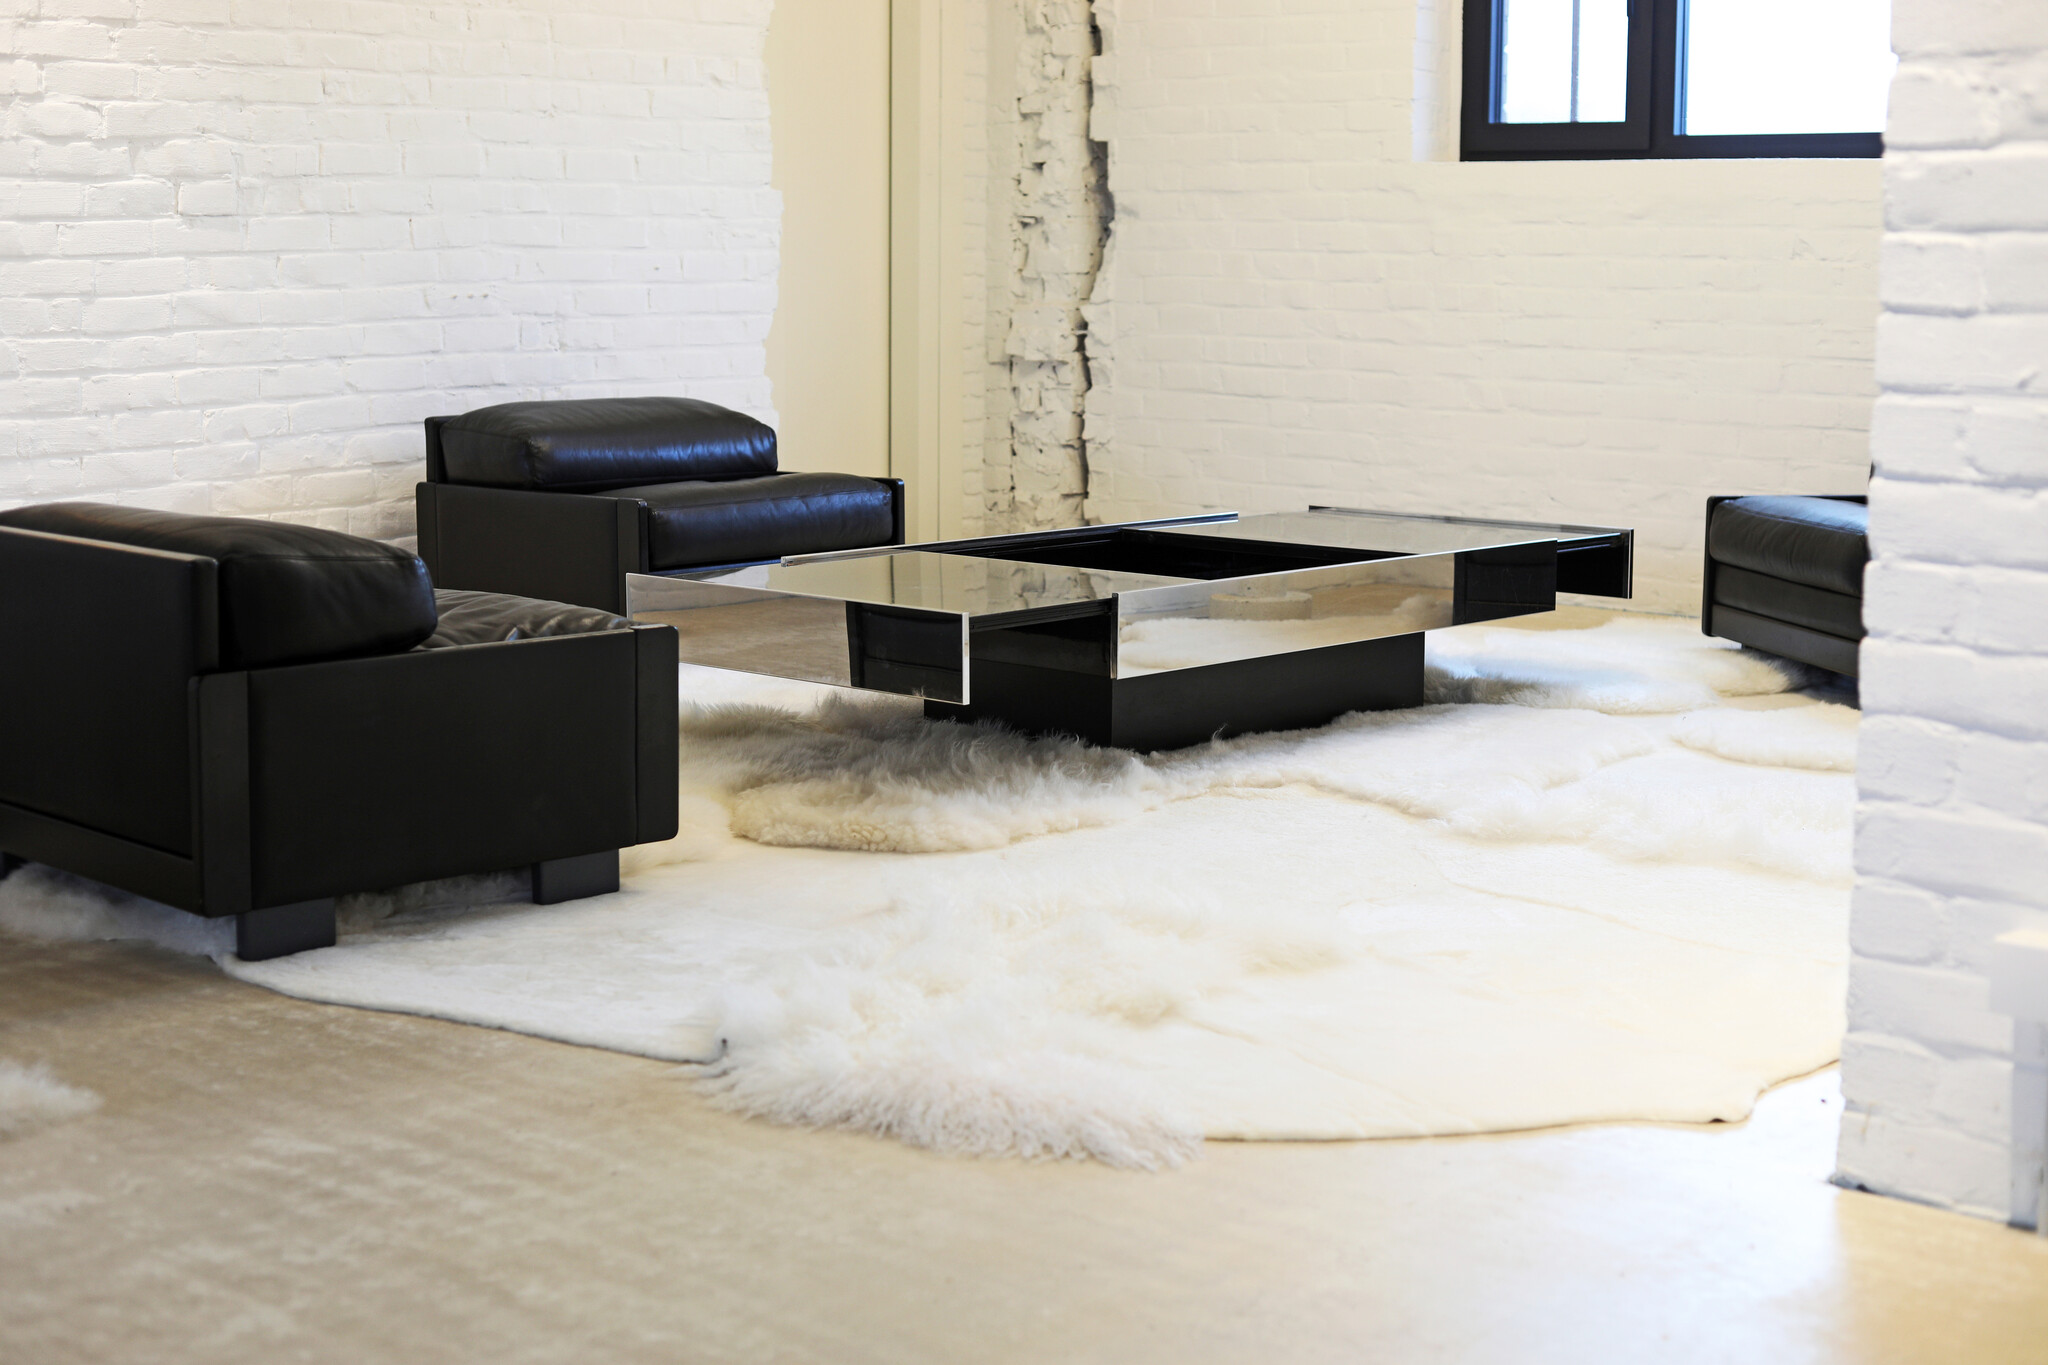 Coffee table with hidden bar by Rizzo Rizzo & Cidue 1970.